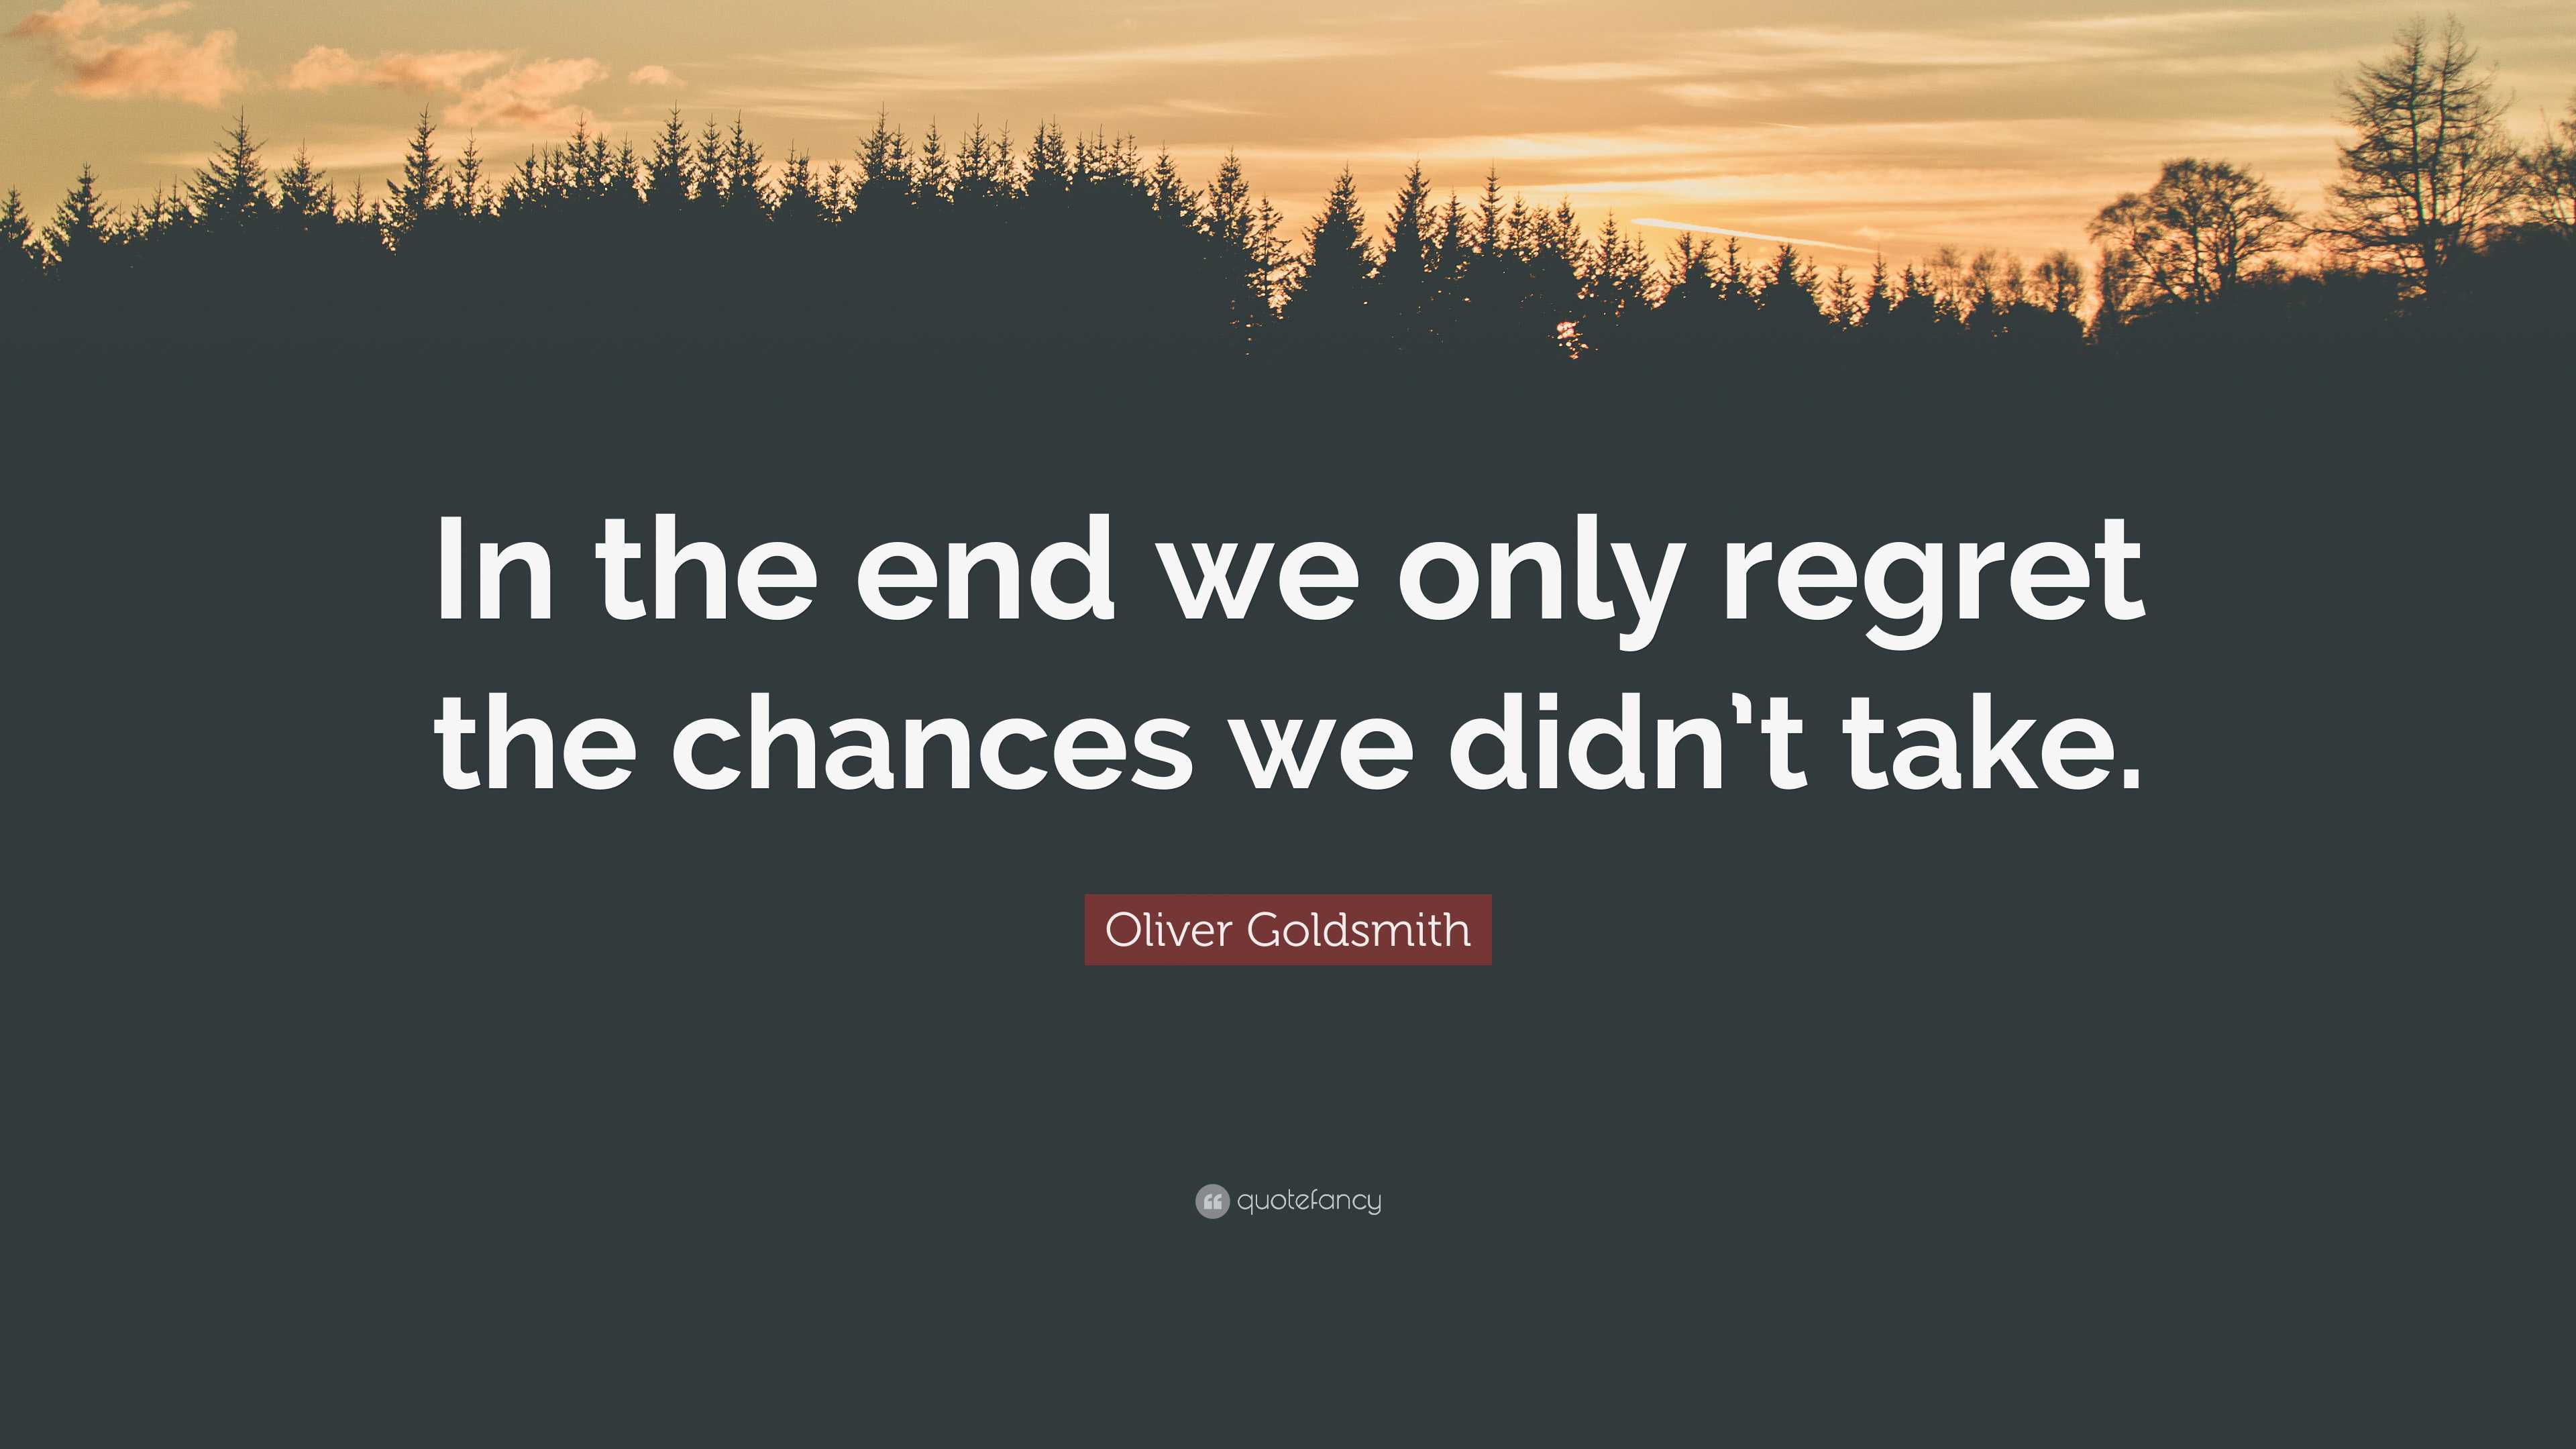 Oliver Goldsmith Quote: “In the end we only regret the chances we didn't  take.”